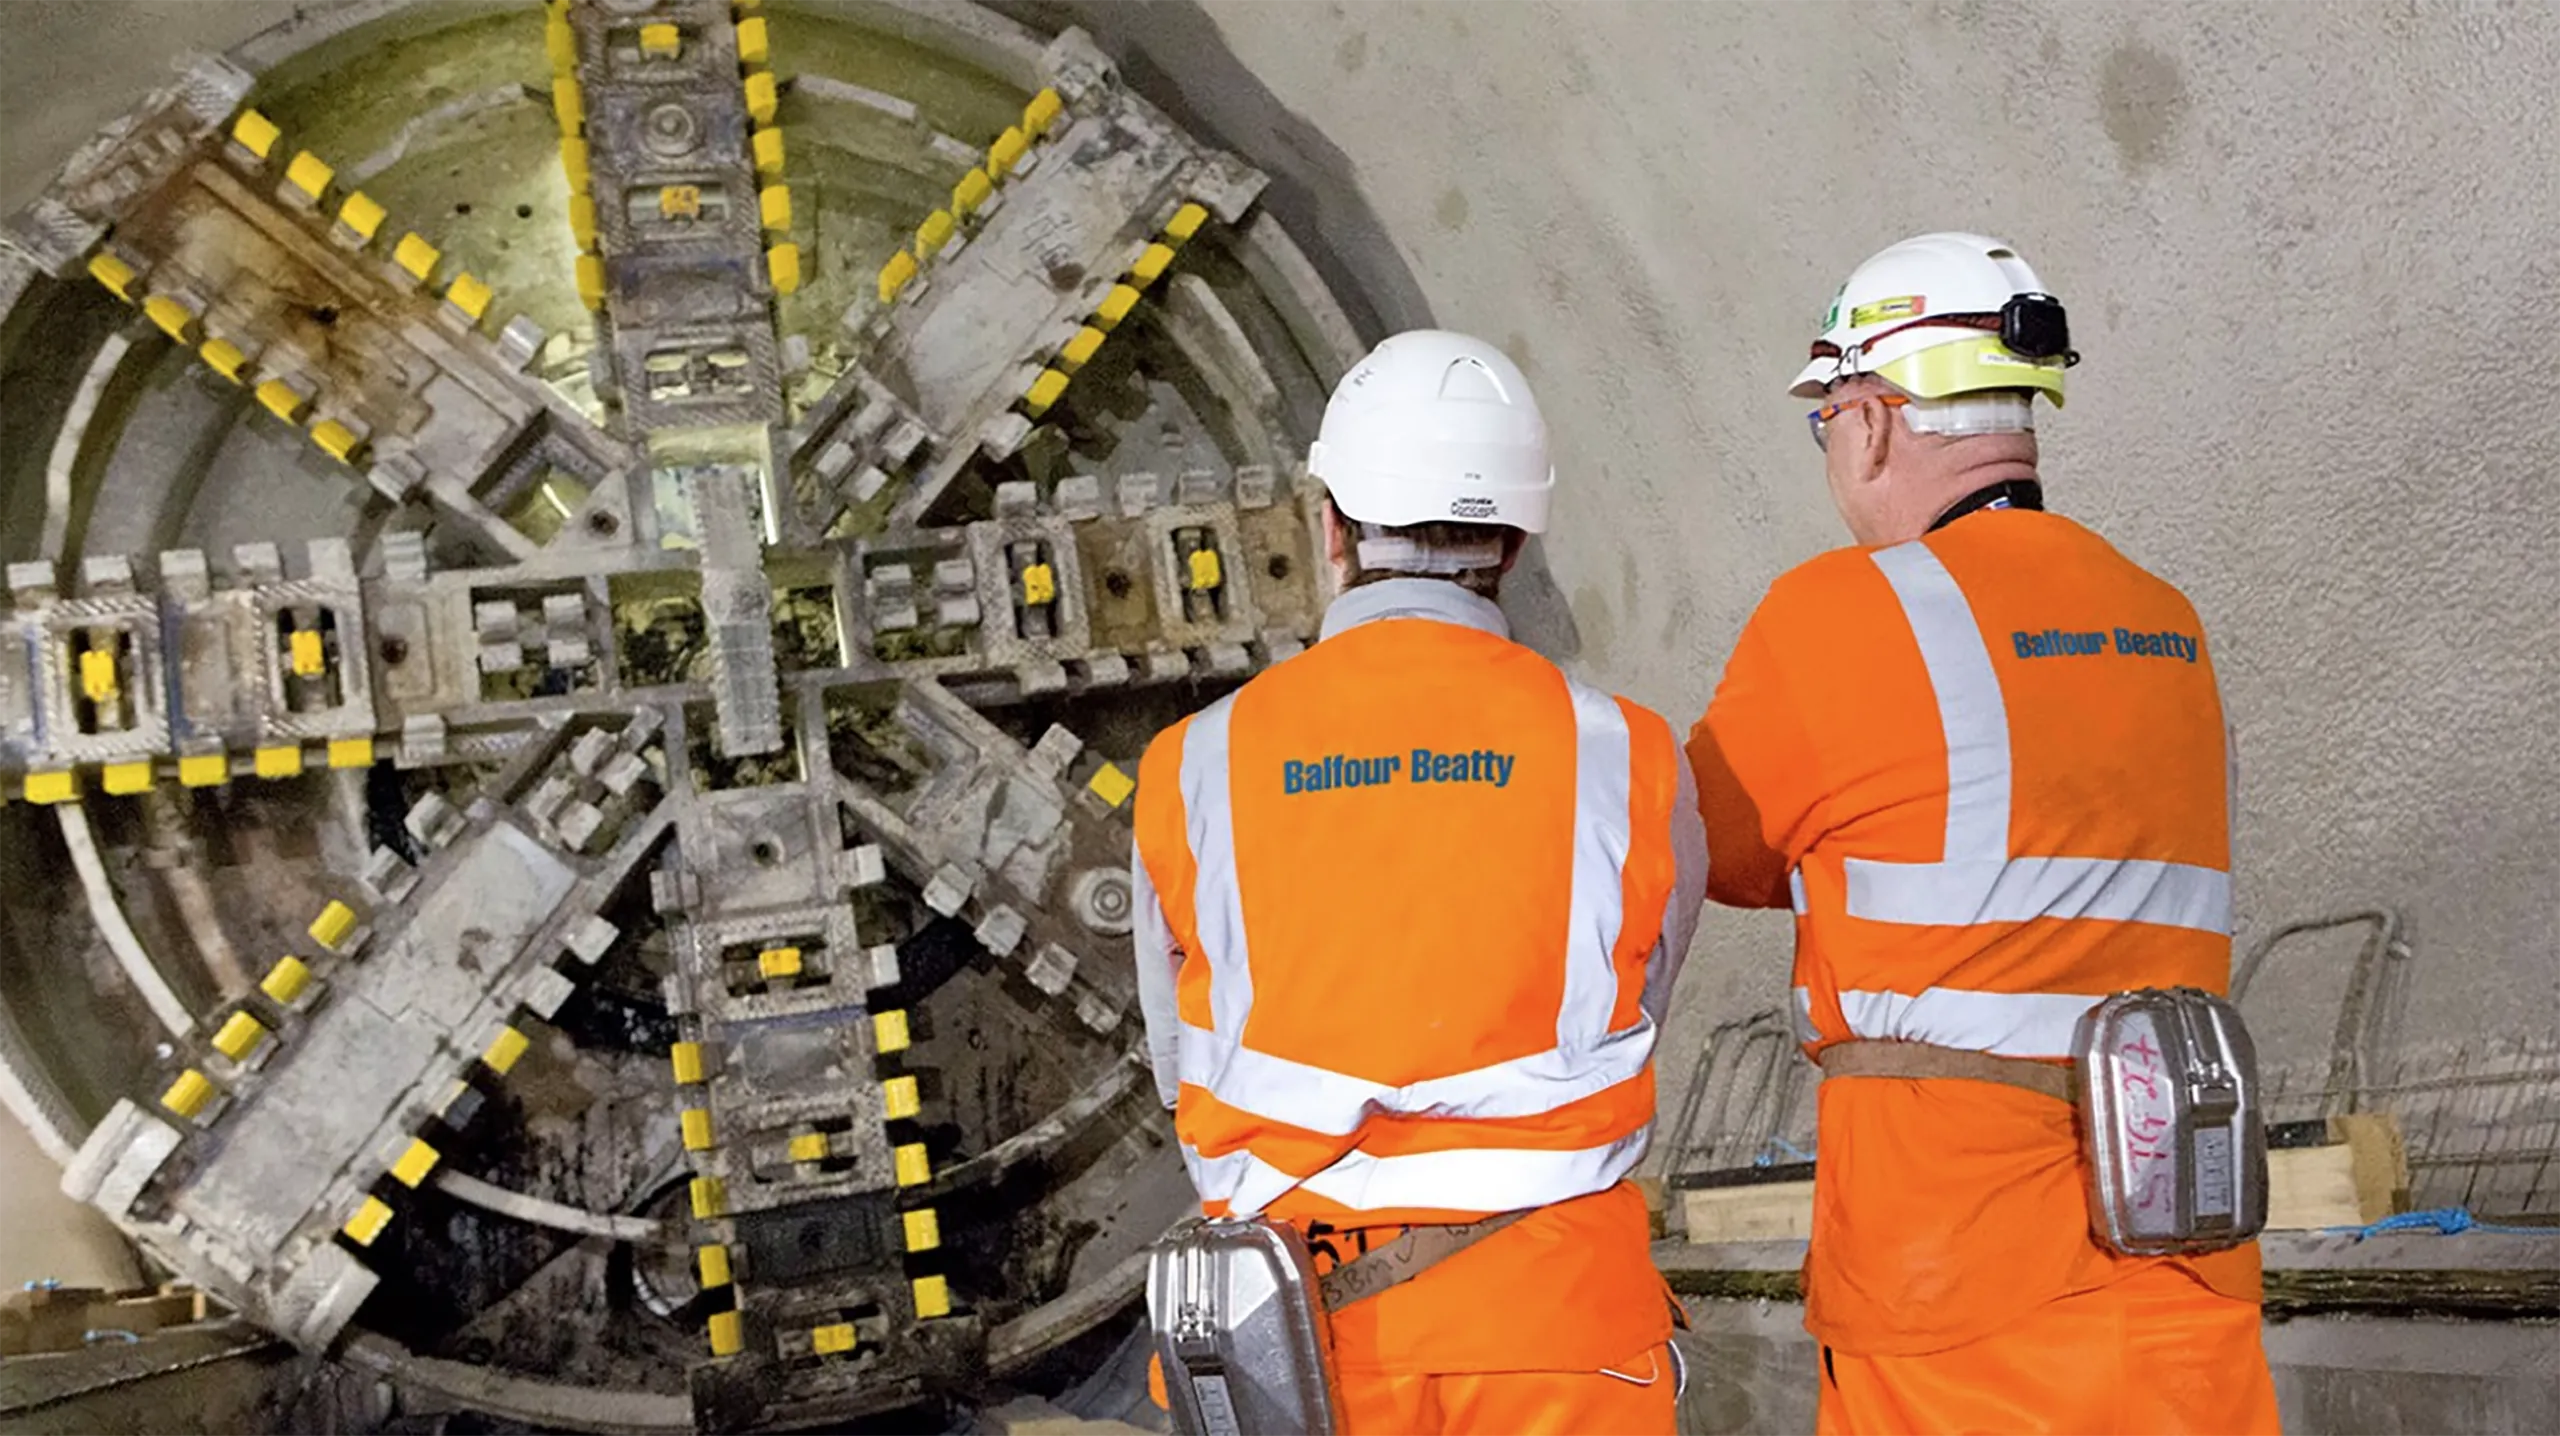 about Balfour Beatty Investments